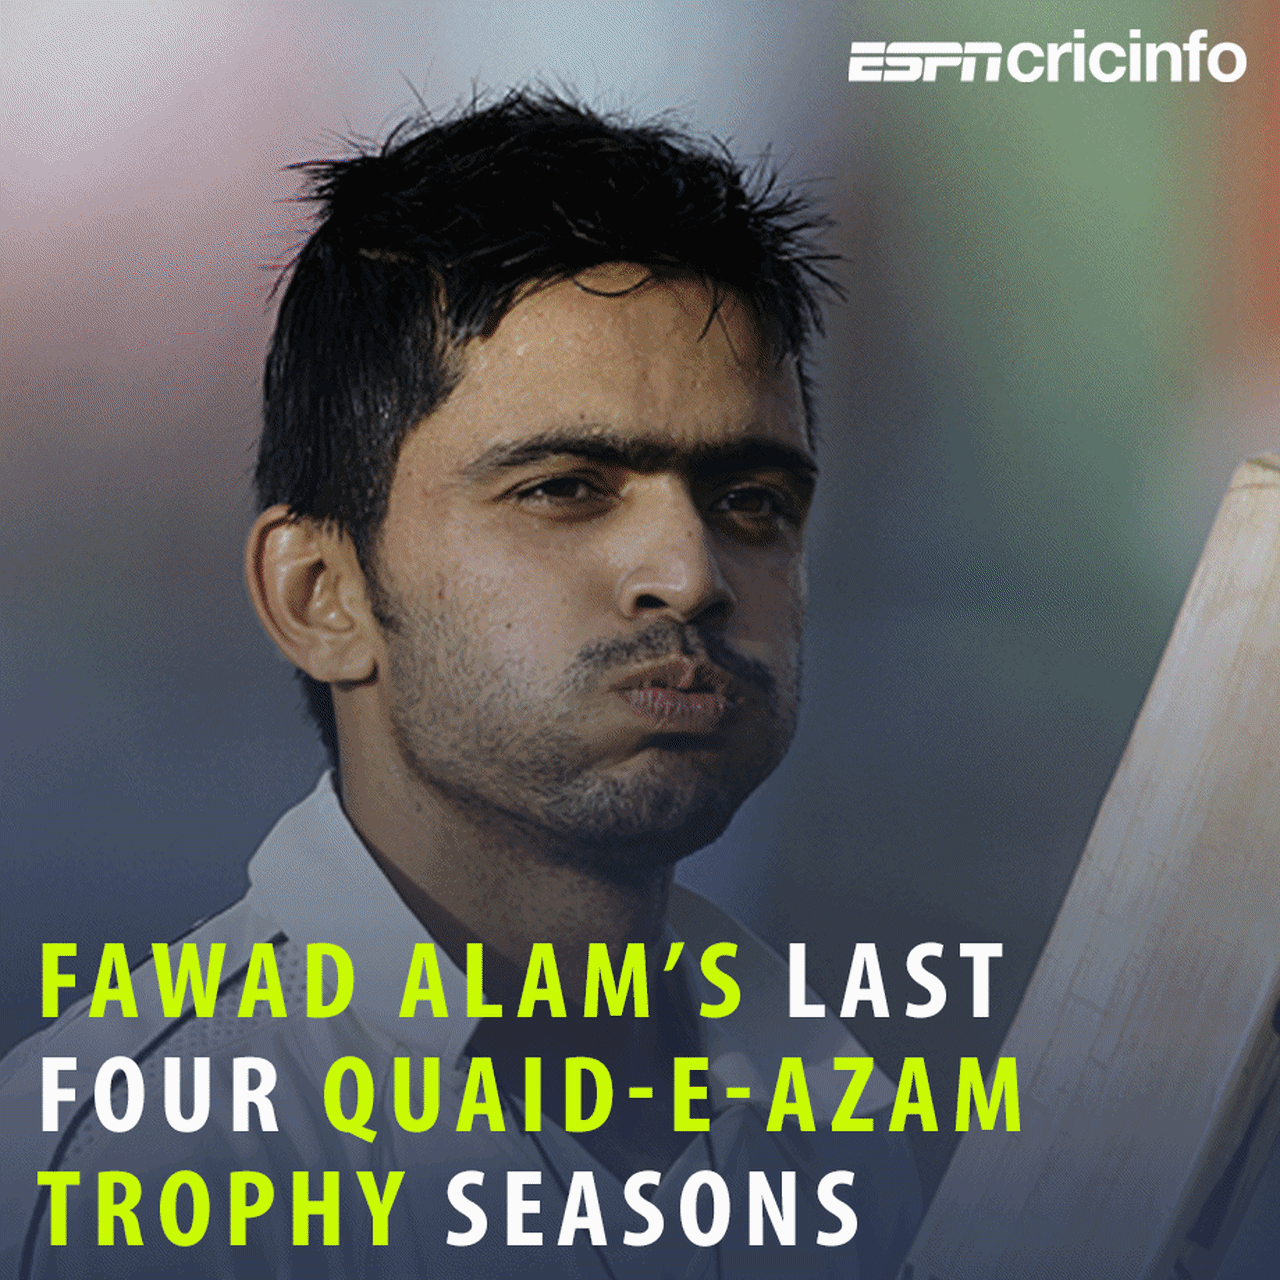 Despite consistent showings in the Quaid-e-Azam Trophy, Fawad Alam hasn't played a Test since 2009